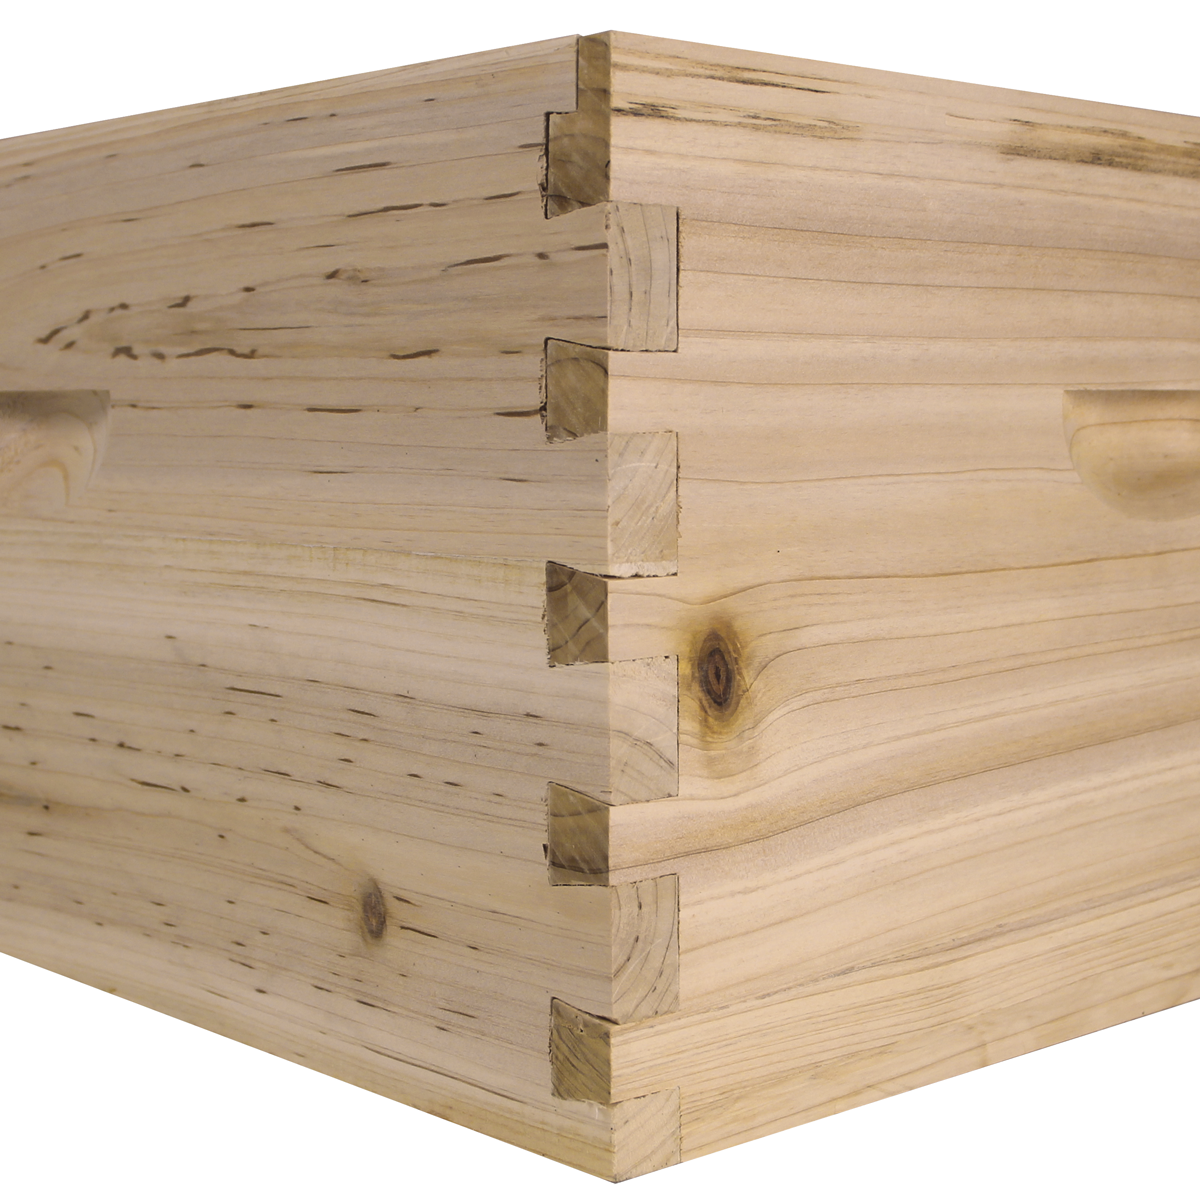 10 Frame Deep Brood Box w/ Dovetail Joints (Assembled w/ Frames and Foundations)